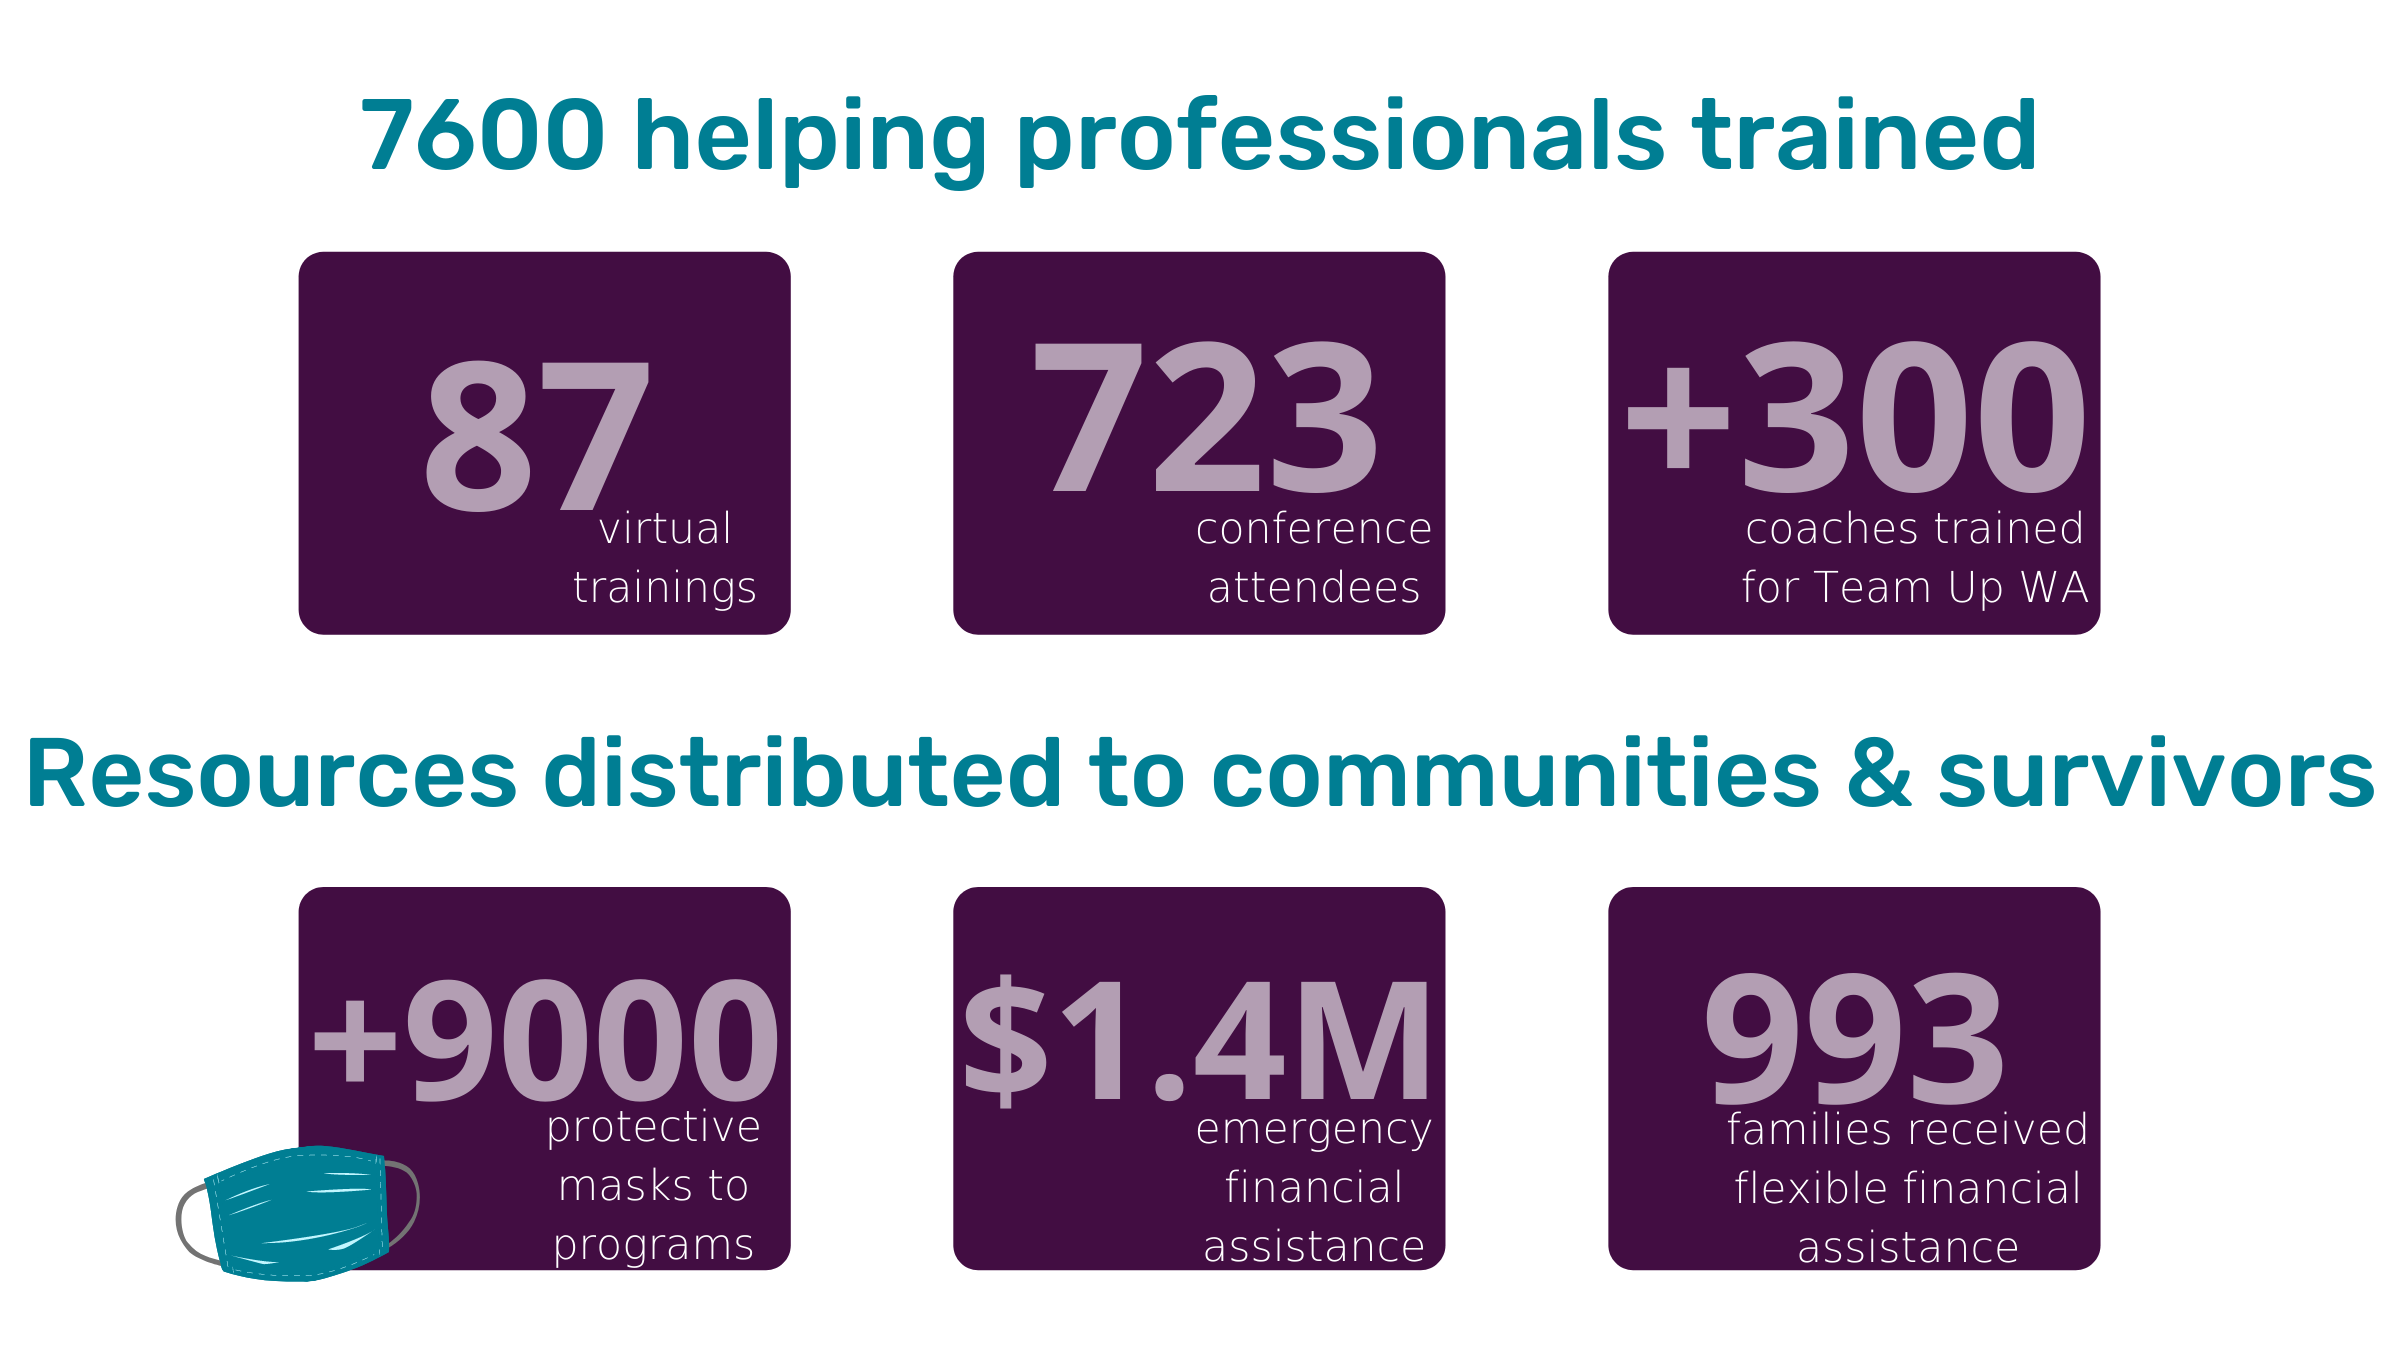 Infographic of WSCADV 2020 statistics. Information reads "7600 helping professionals trained. 87 virtual trainings, 723 conference attendees, +300 coaches trained for Team Up WA. Resources distributed to communities and survivors: +9000 protective masks to programs, $1.4 million in emergency financial assitance, 993 families recieved flexible financial assistance."